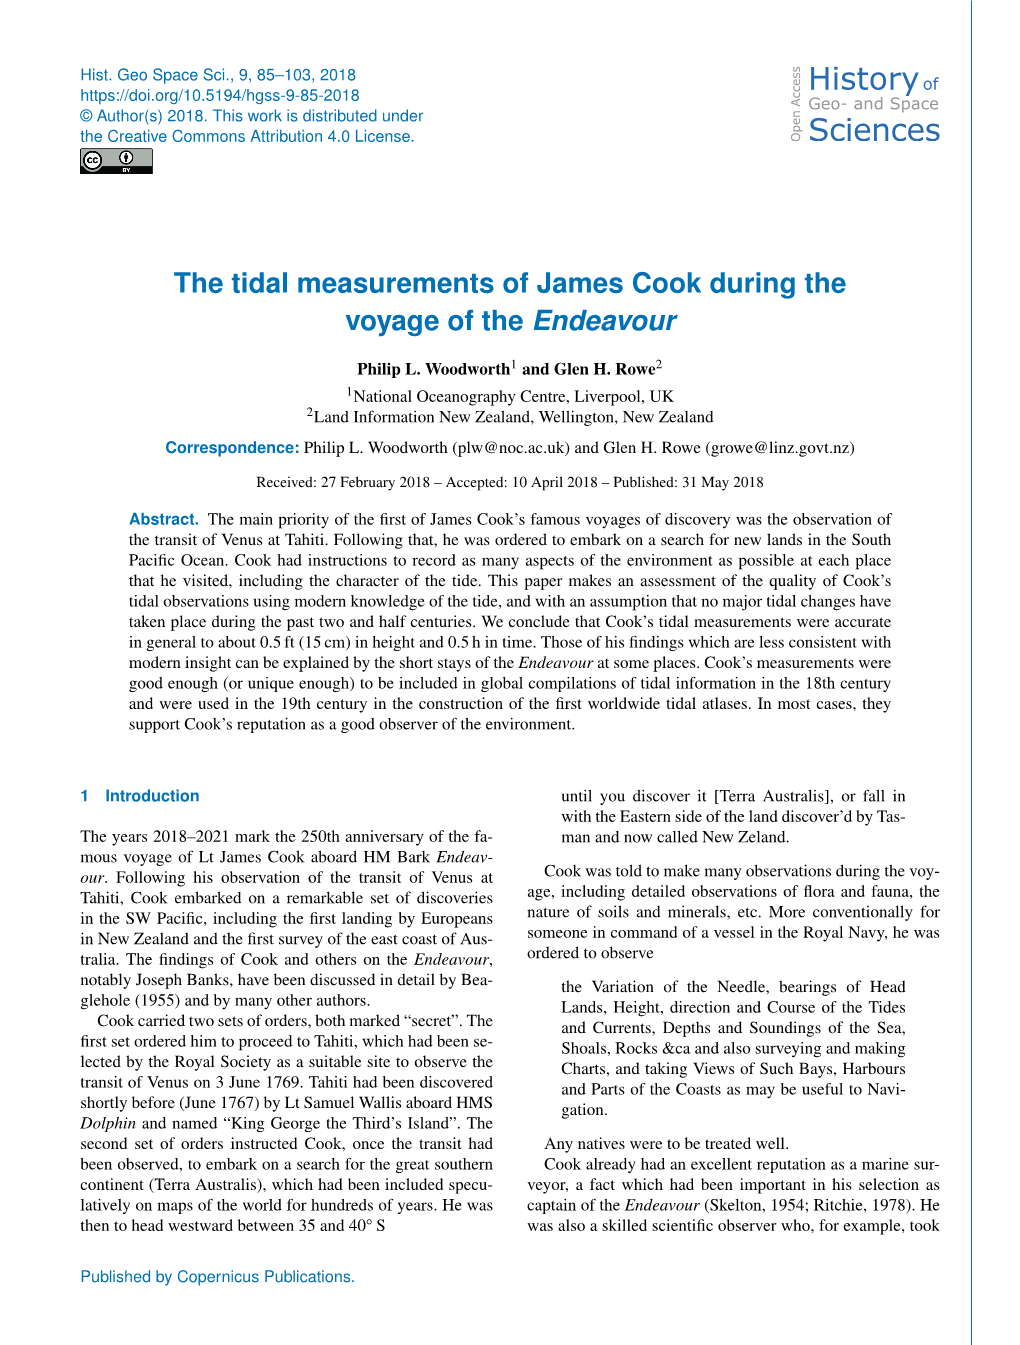 The Tidal Measurements of James Cook During the Voyage of the Endeavour